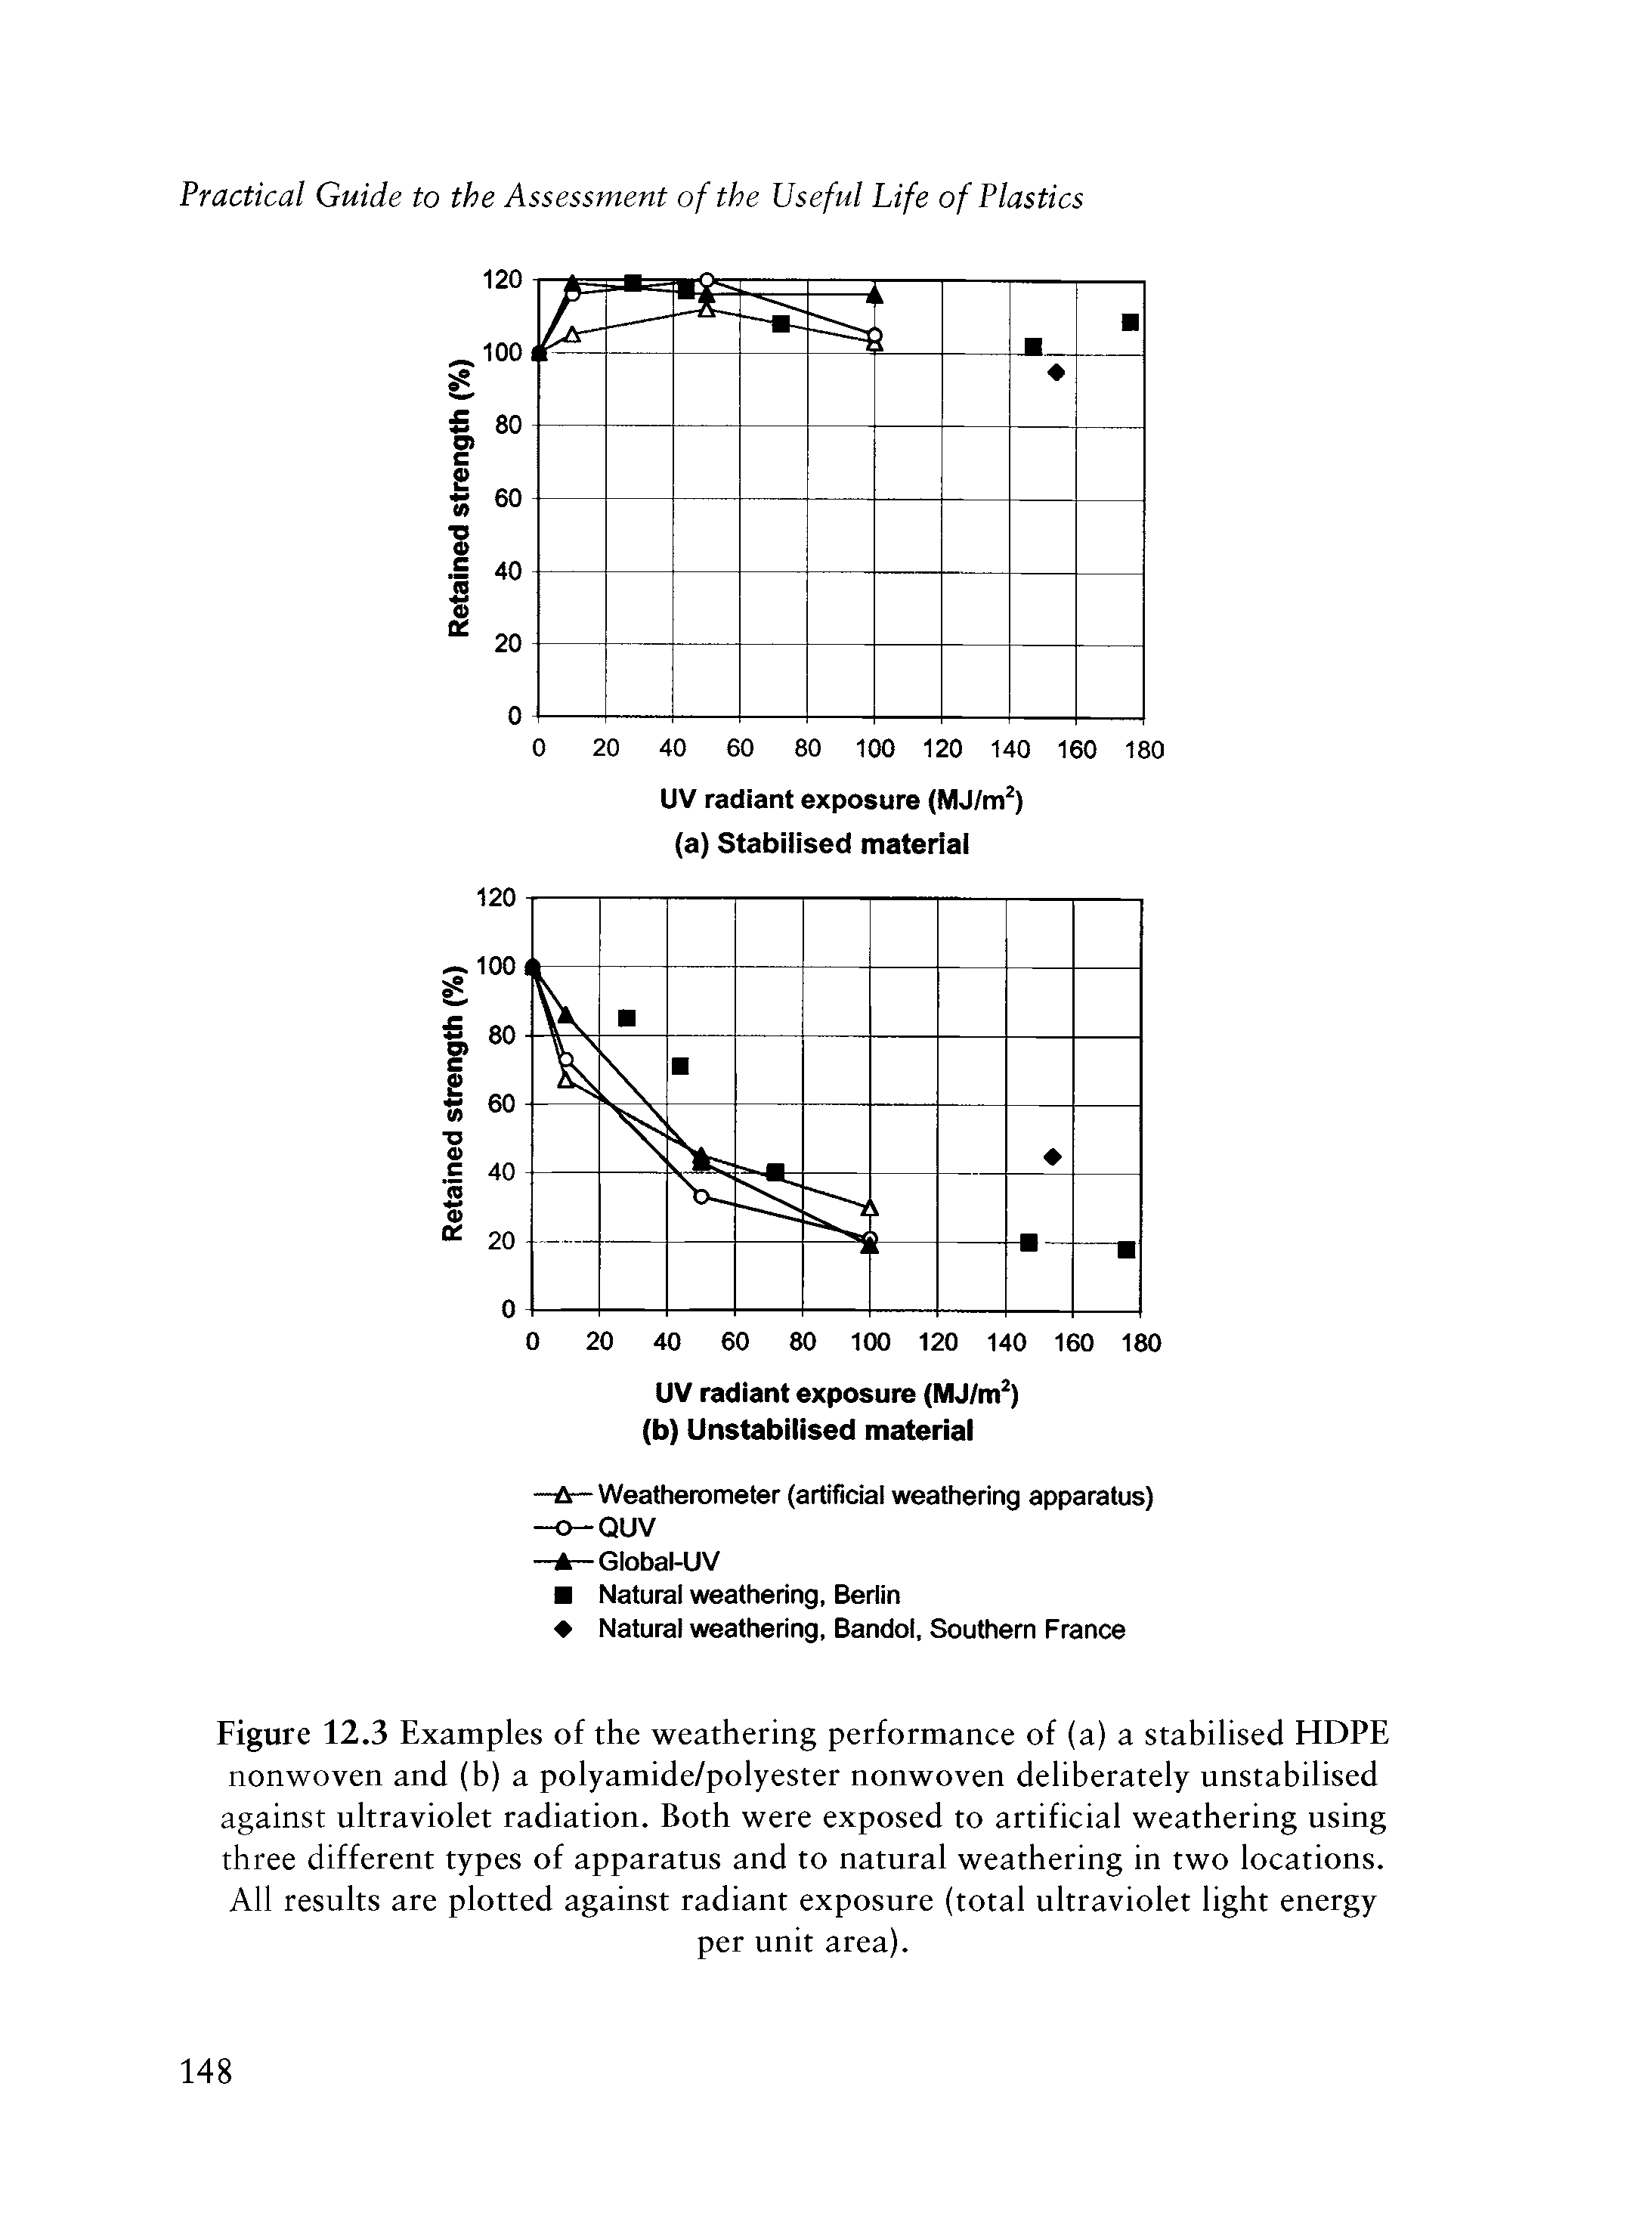 Figure 12.3 Examples of the weathering performance of (a) a stabilised HDPE nonwoven and (b) a polyamide/polyester nonwoven deliberately unstabilised against ultraviolet radiation. Both were exposed to artificial weathering using three different types of apparatus and to natural weathering in two locations. All results are plotted against radiant exposure (total ultraviolet light energy...